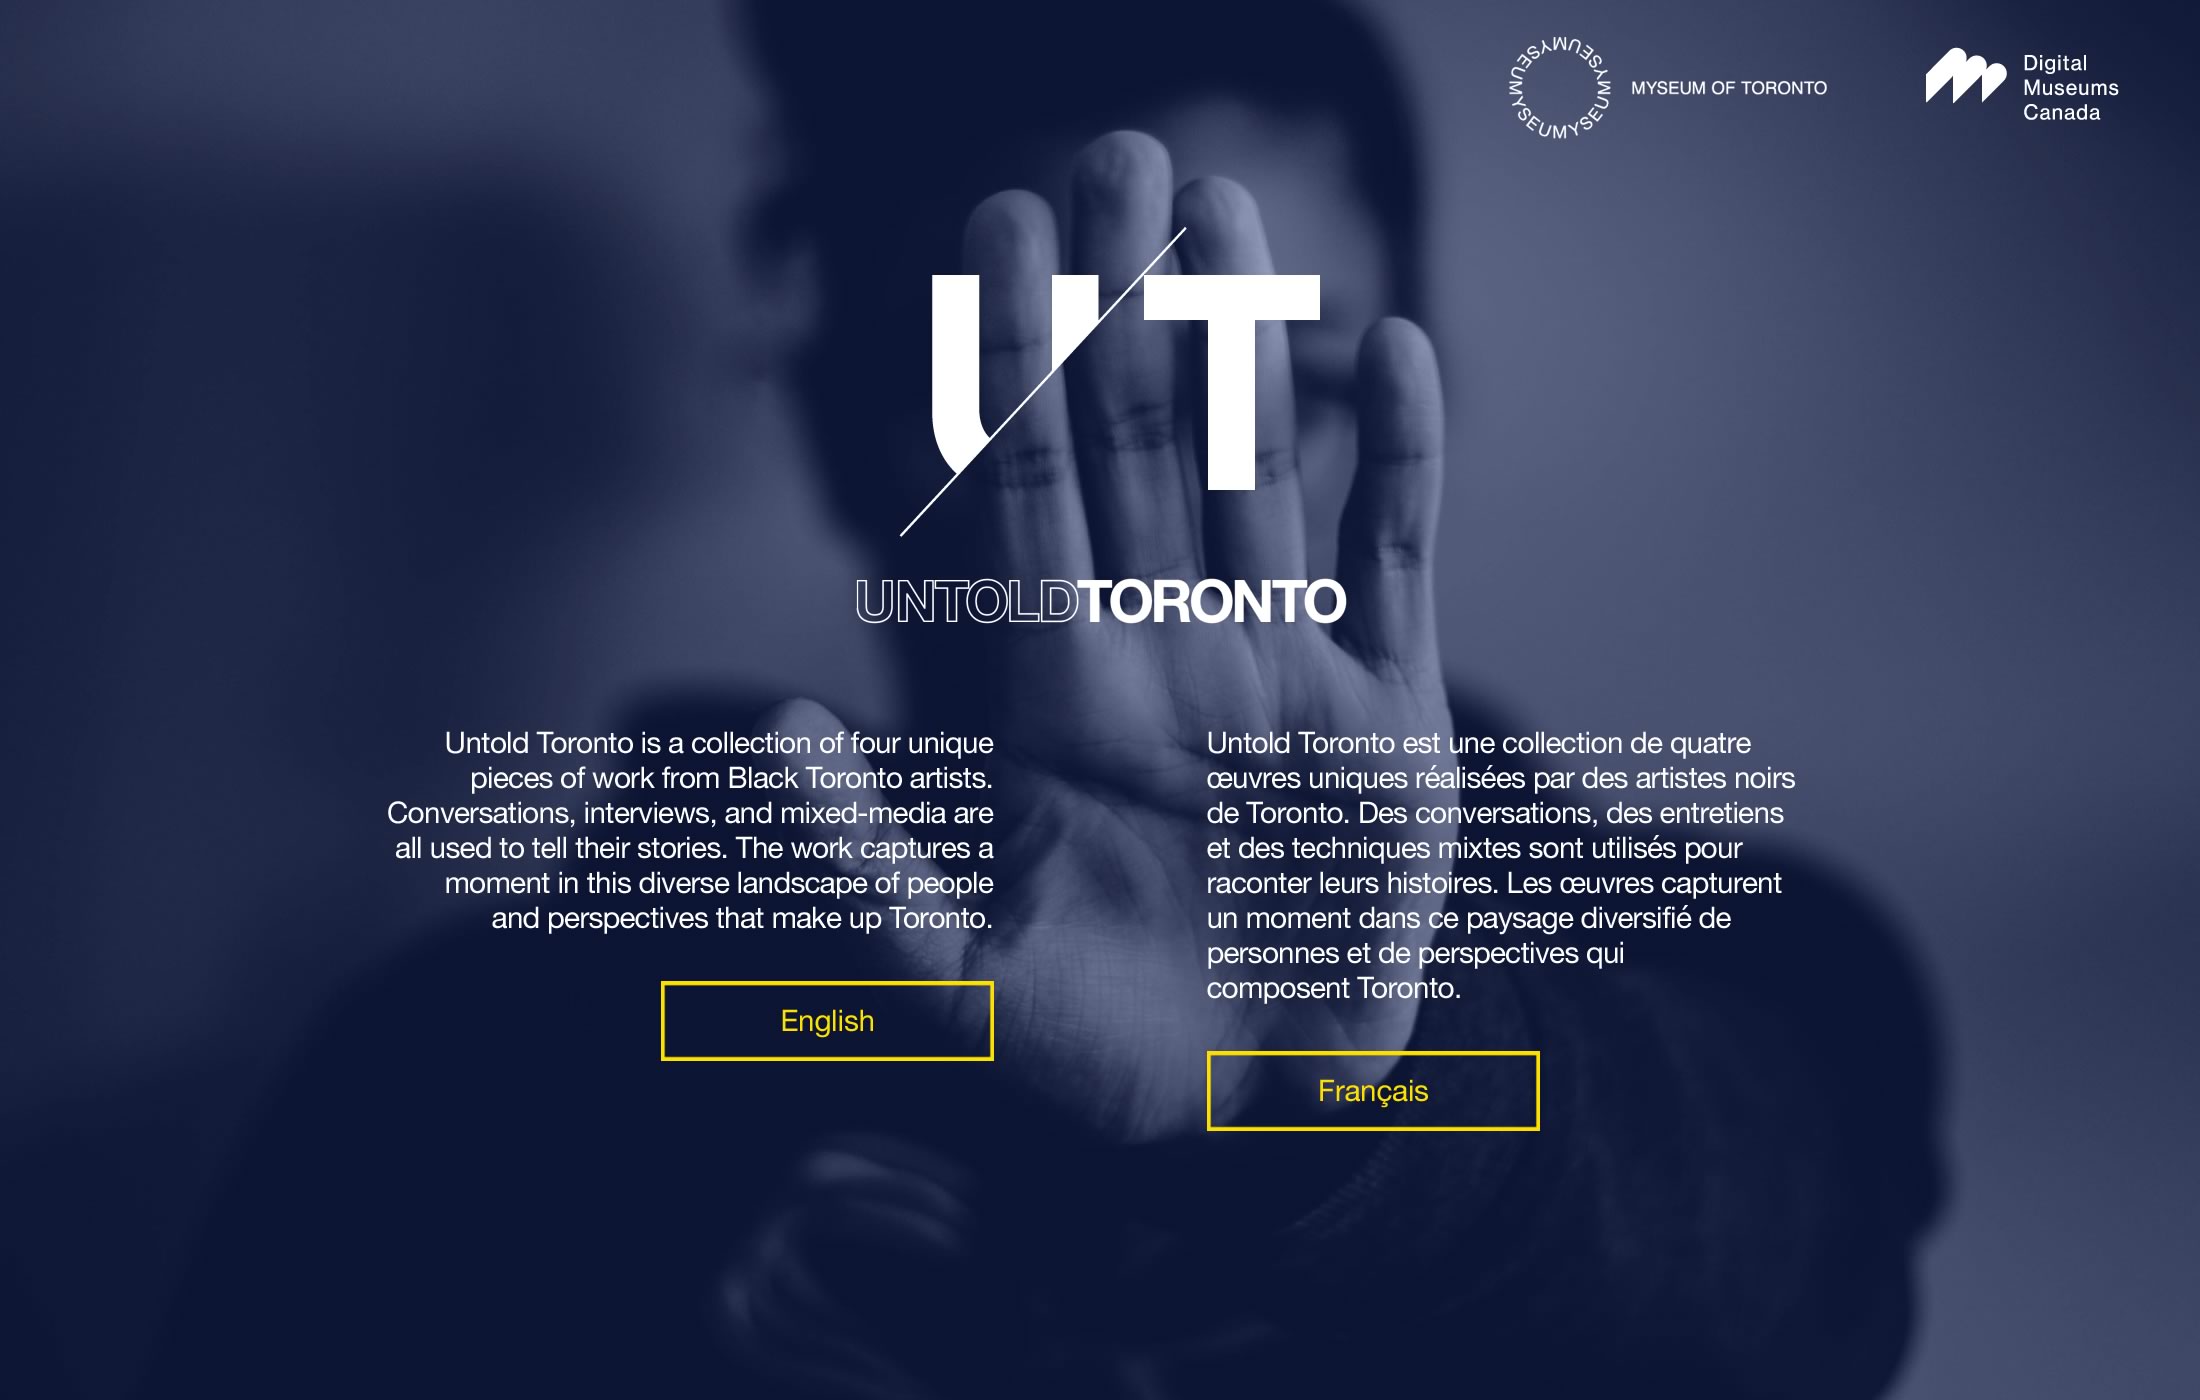 Capture of the interstitial/langaguage selection page from the Untold Toronto microsite